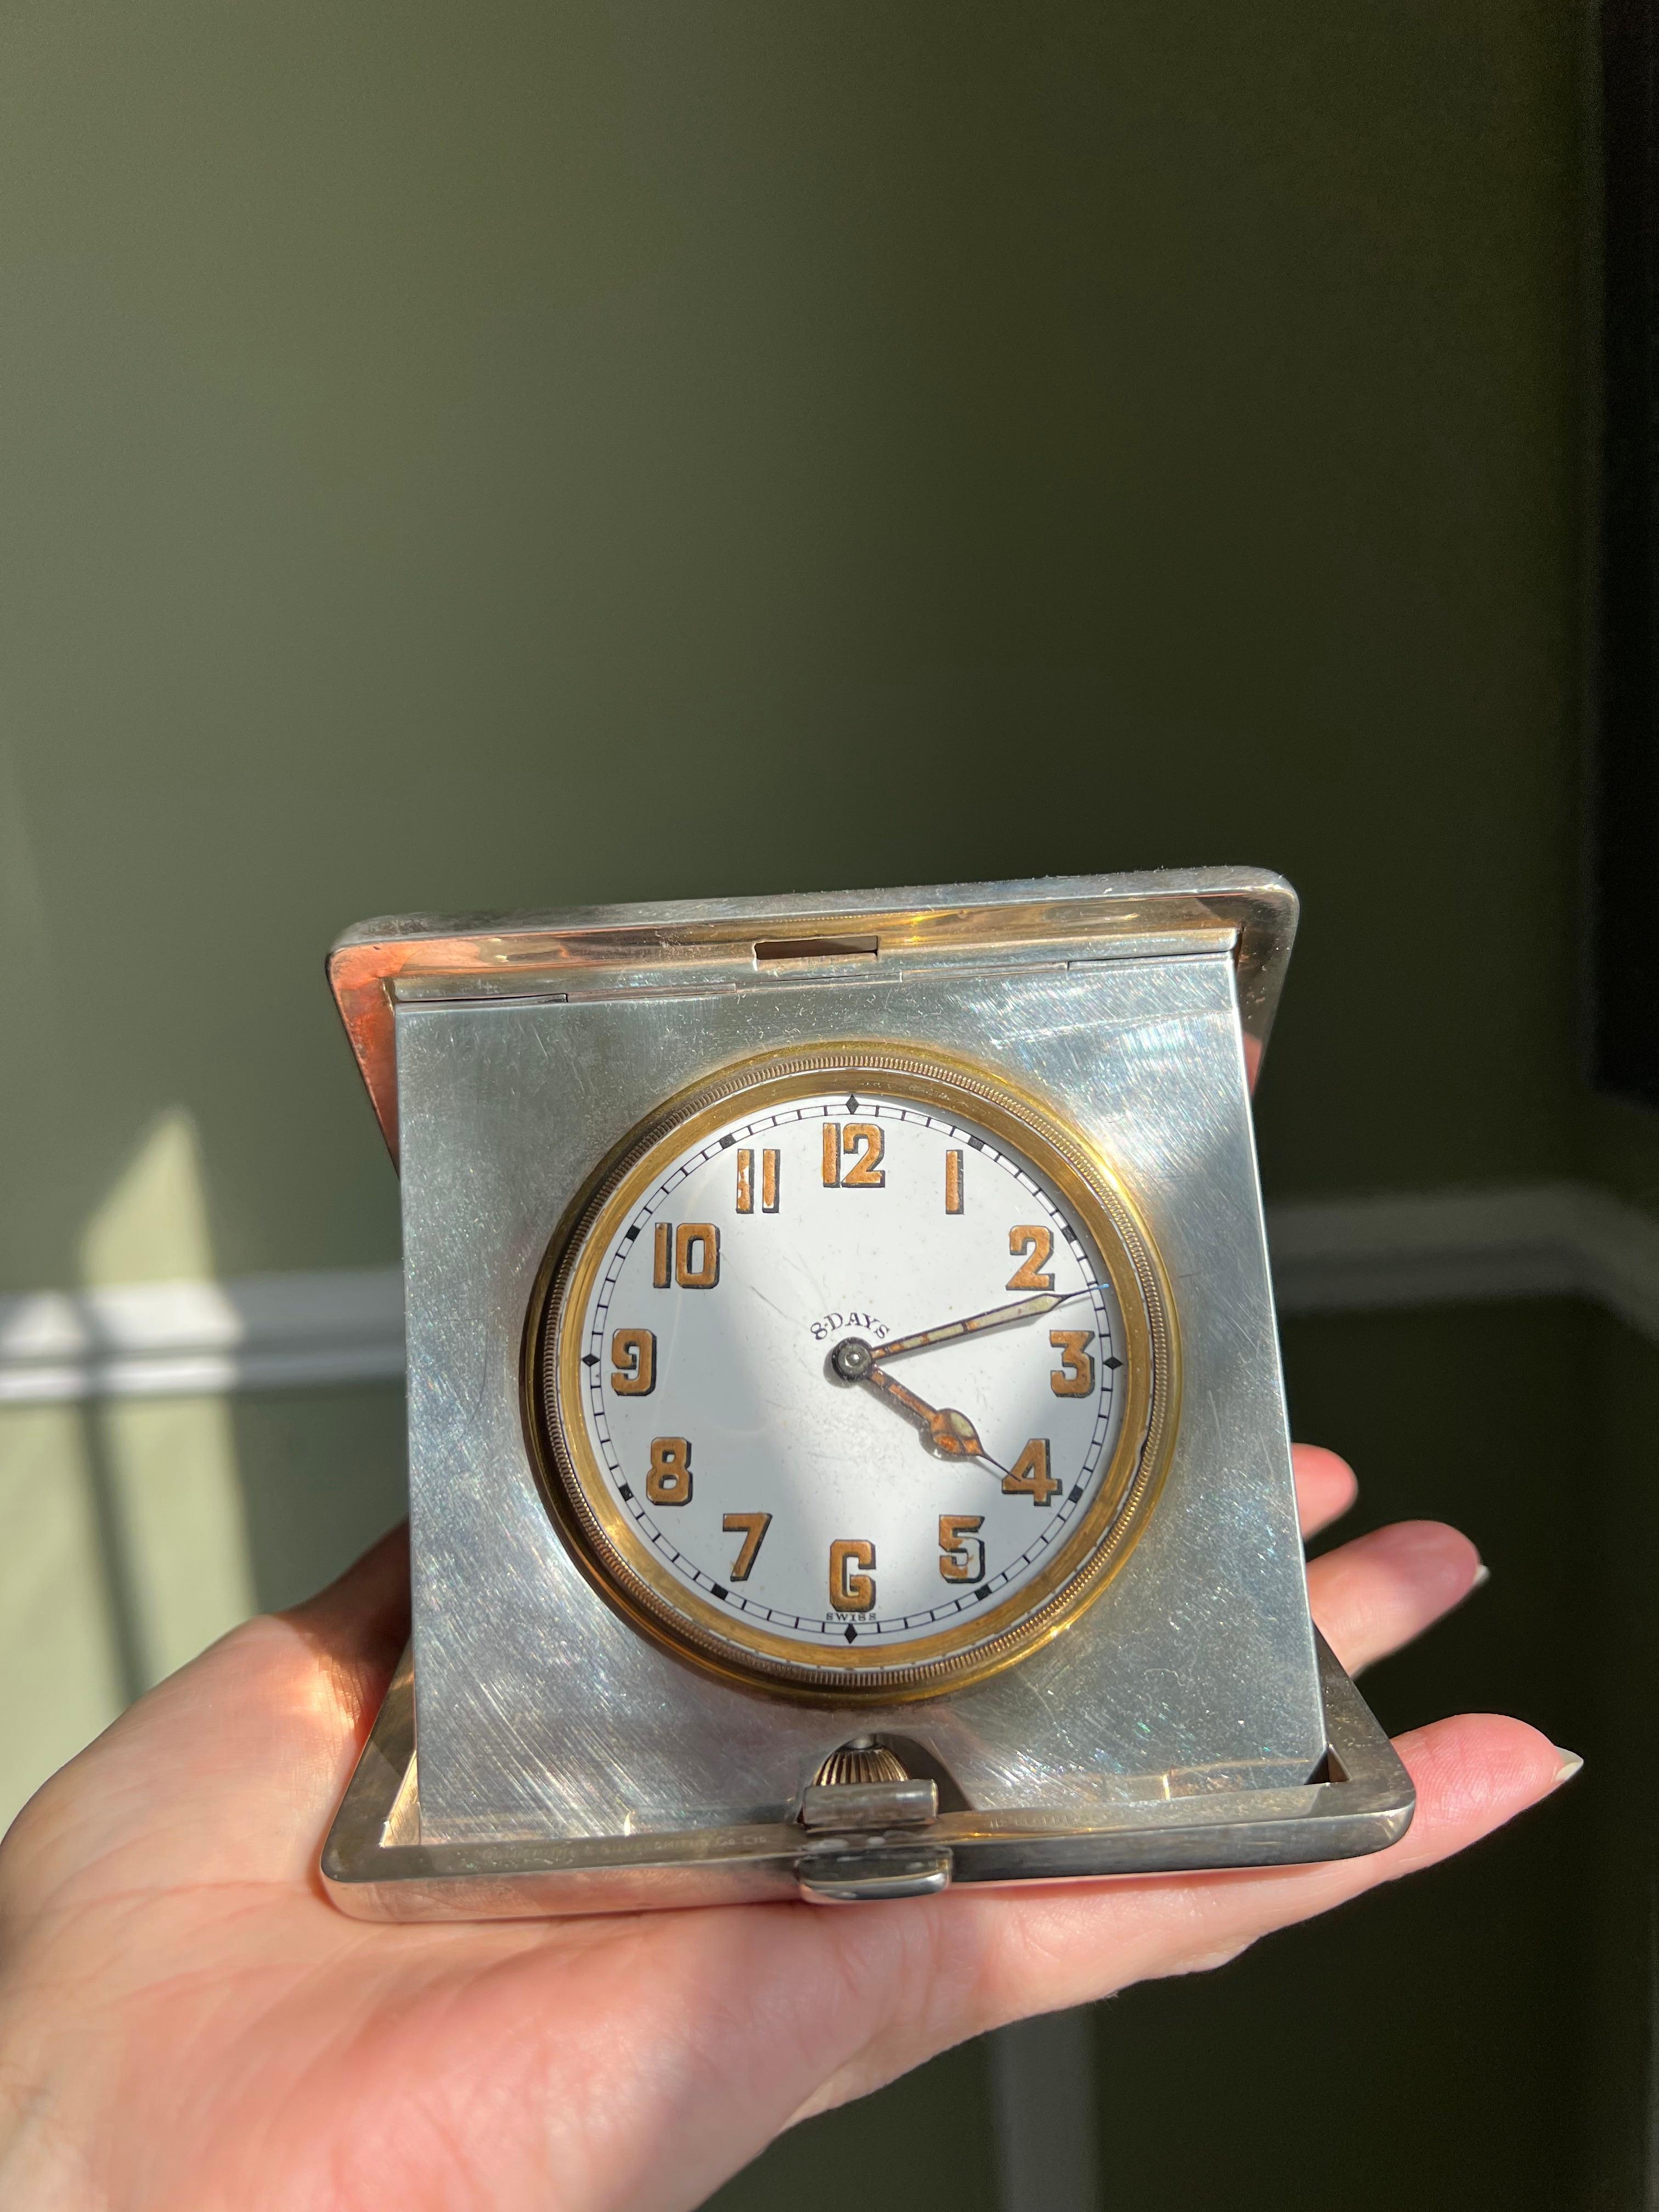 Mr. Giallo is opening his personal vault to sell a collection of his treasured antiques he's held on for so long.

ABOUT ITEM
Goldsmith & Silversmith sterling silver travel desk 8 day clock. Solid really nice weight to clock. Great piece that can